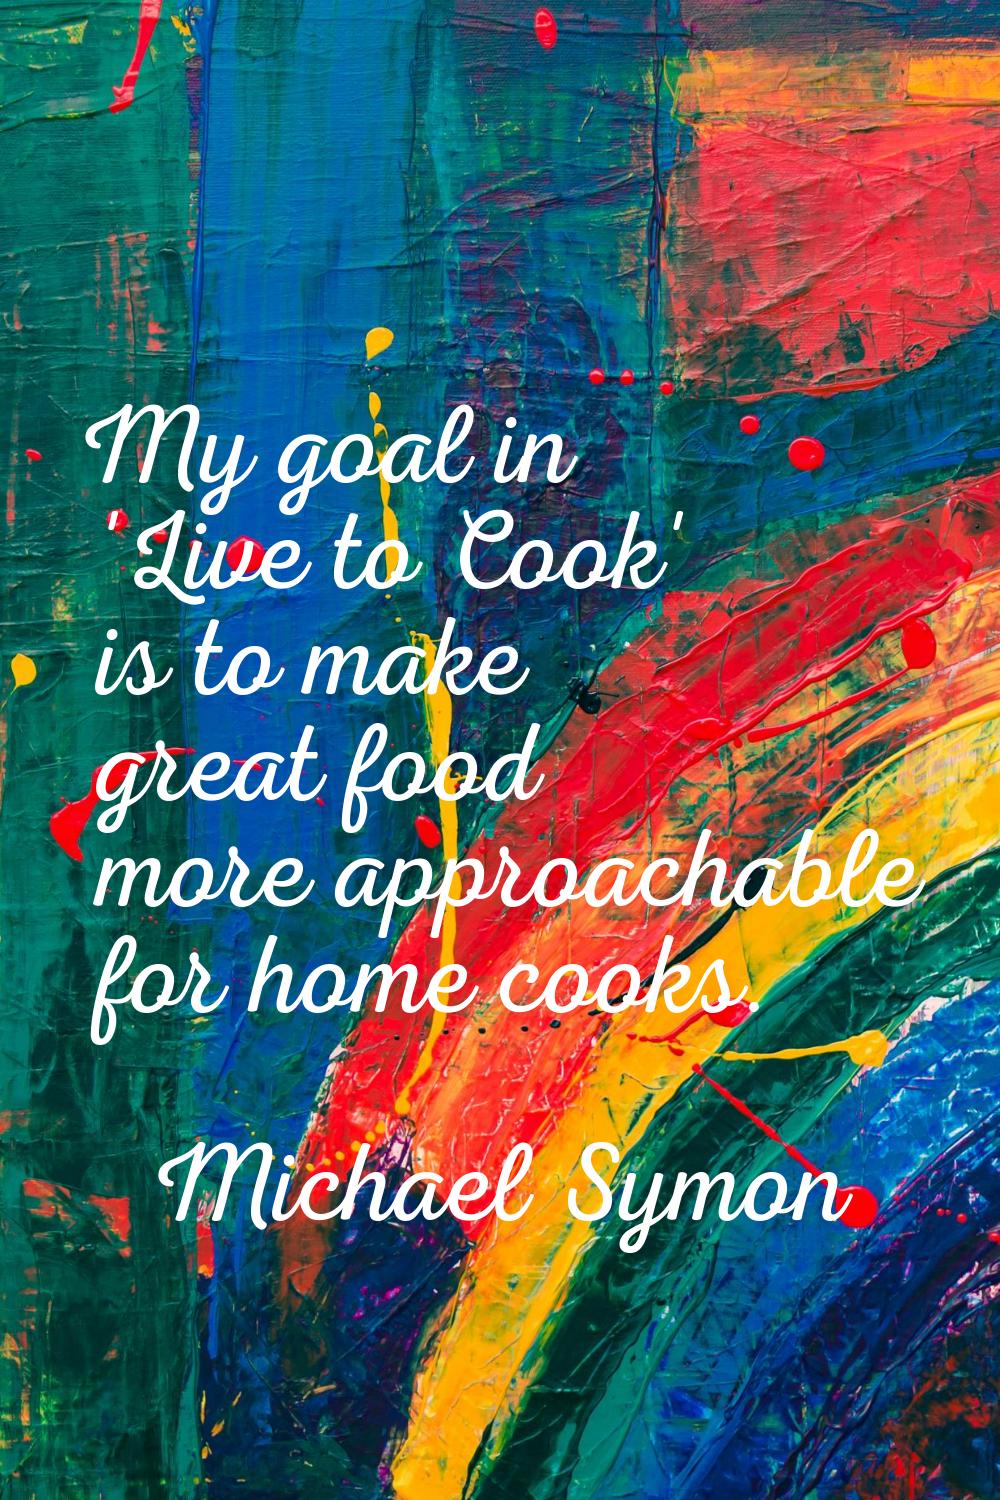 My goal in 'Live to Cook' is to make great food more approachable for home cooks.